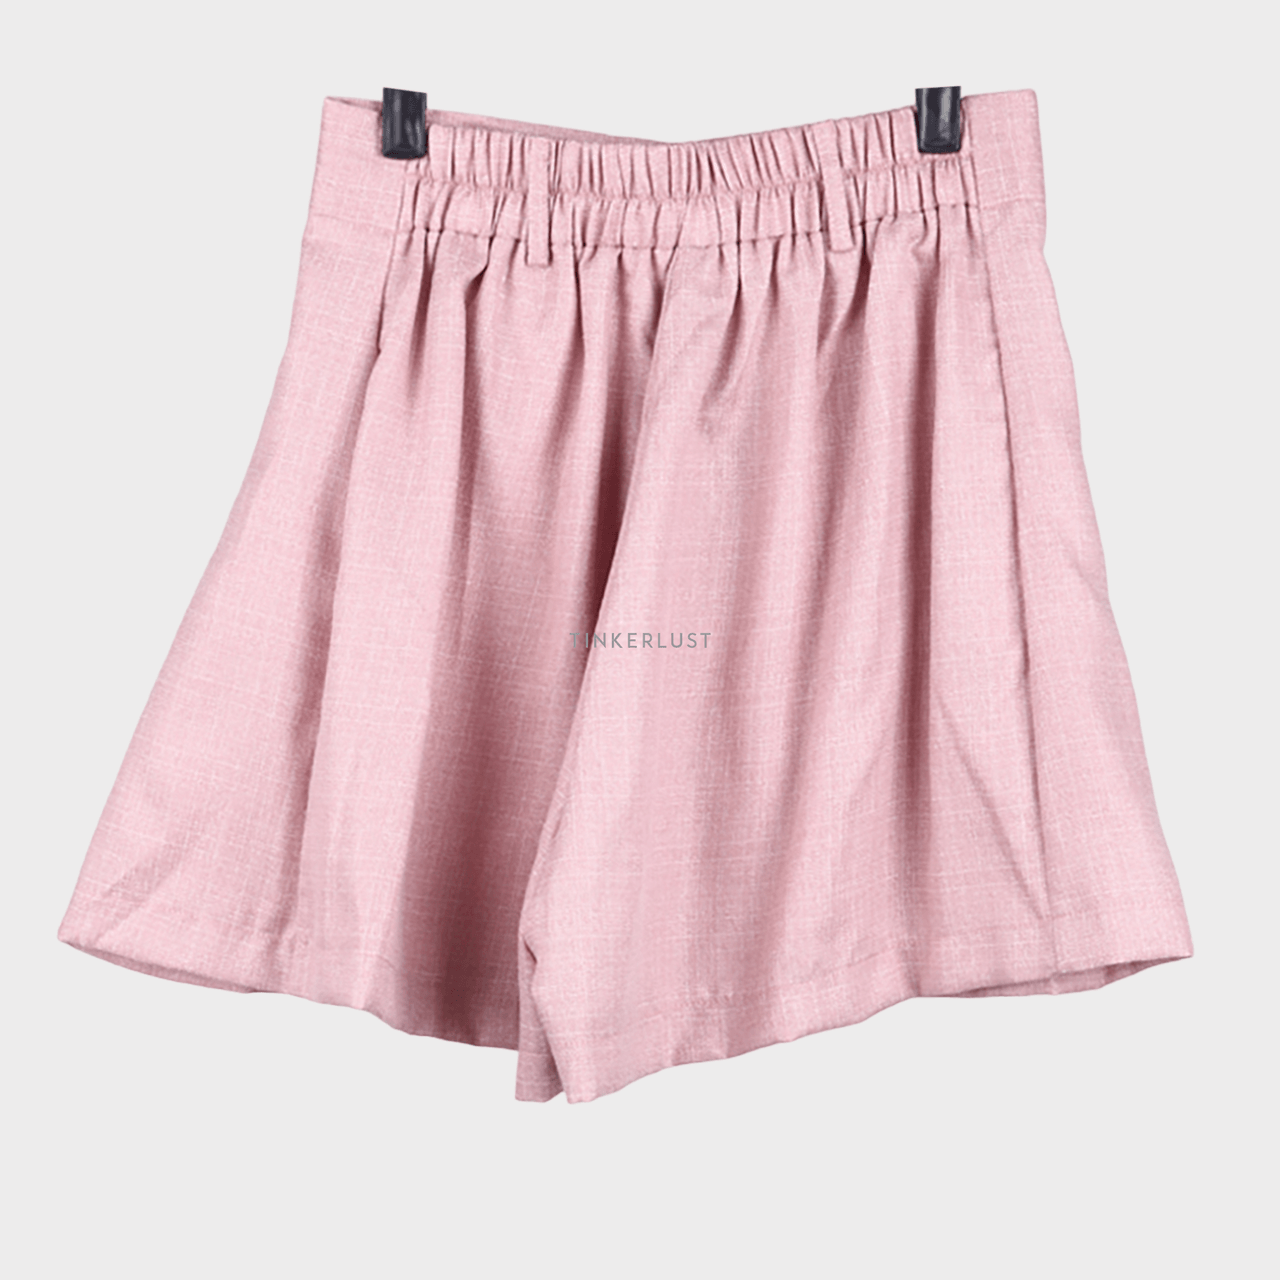 Boss Babe The Label Pink Short Pants